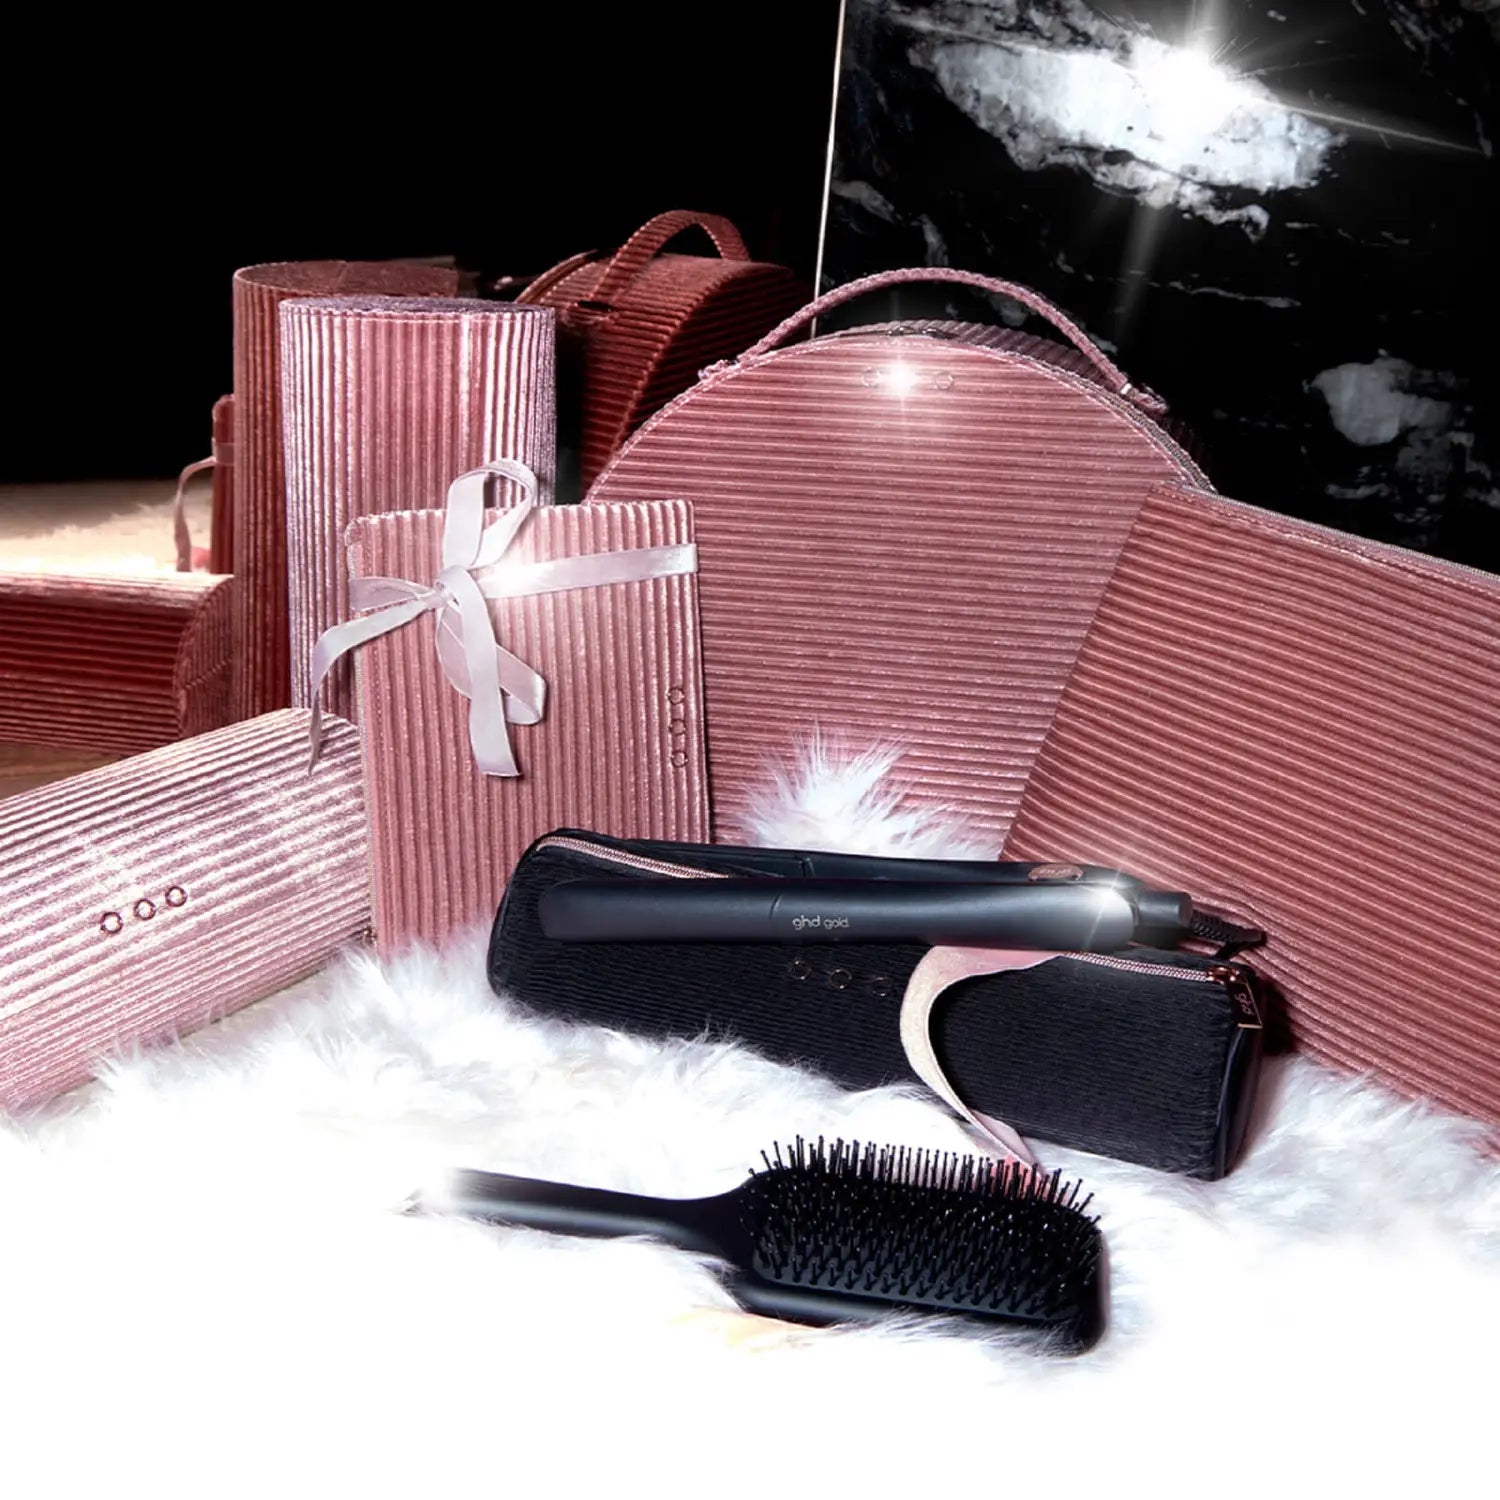 ghd Gold Hair Straightener Christmas Gift Set, lifestyle pic